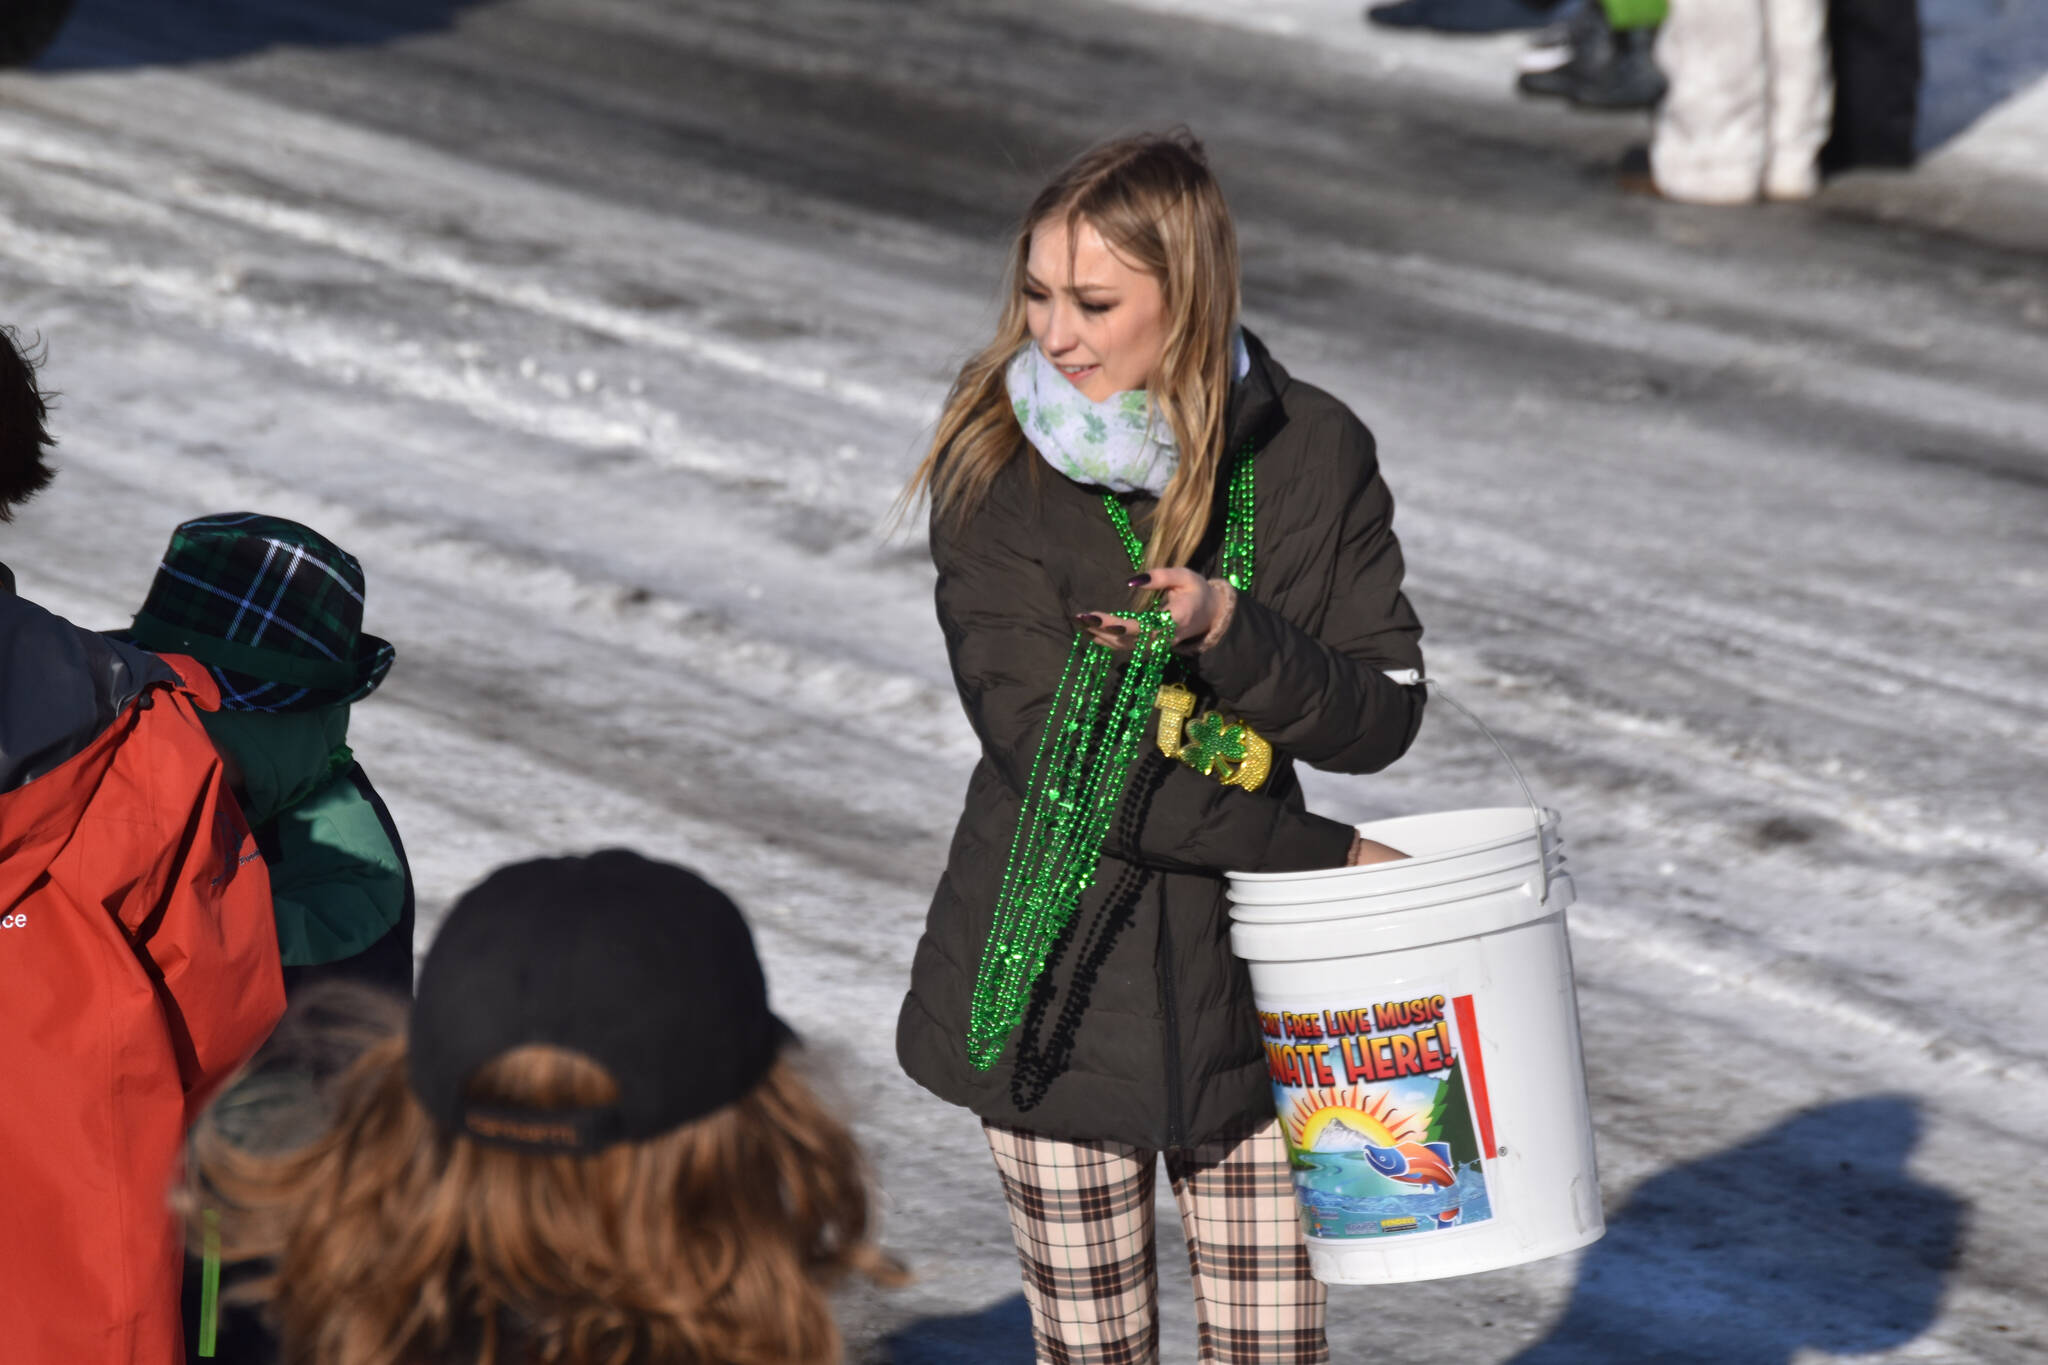 Soldotna Chamber of Commerce Executive Director Maddy McElrea hands out bead necklaces as the 32nd annual Sweeney’s St. Patrick’s Day Parade proceeds down Fireweed Street in Soldotna, Alaska on Friday, March 17, 2023. (Jake Dye/Peninsula Clarion)